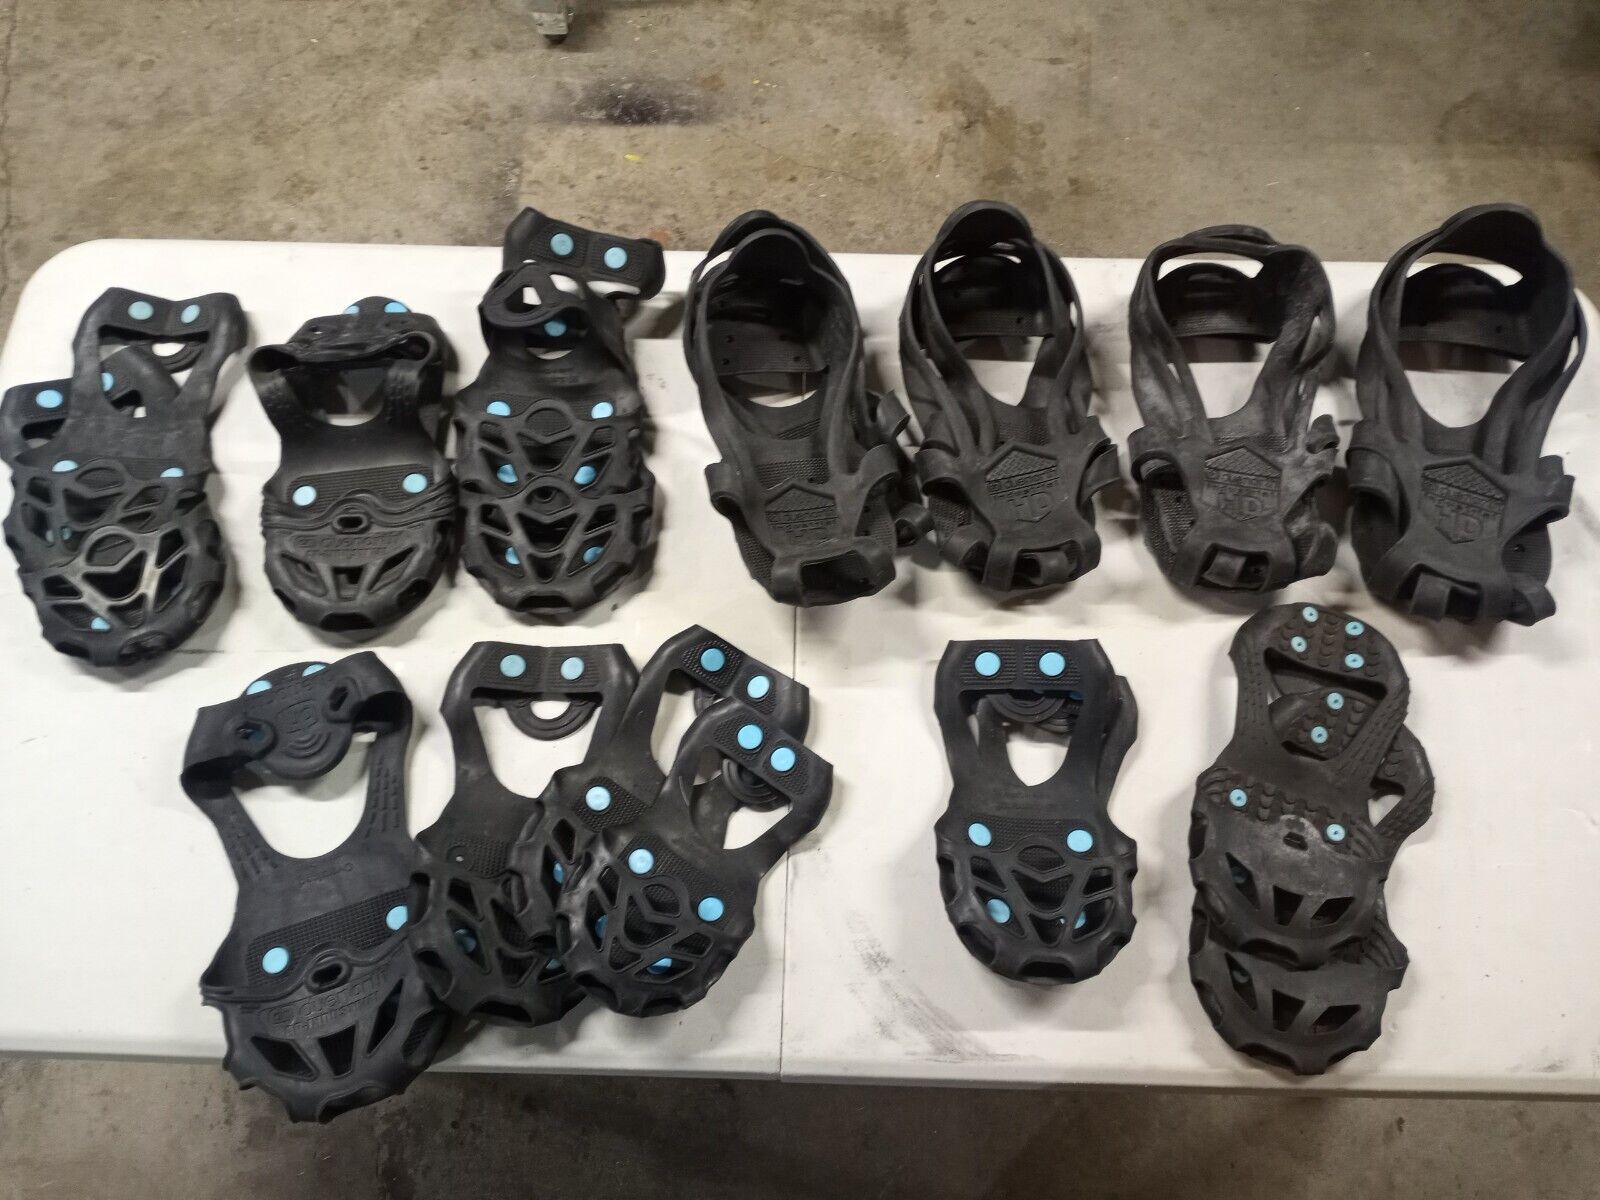 Due North Traction Aid Lot, 9 Pairs, Used.